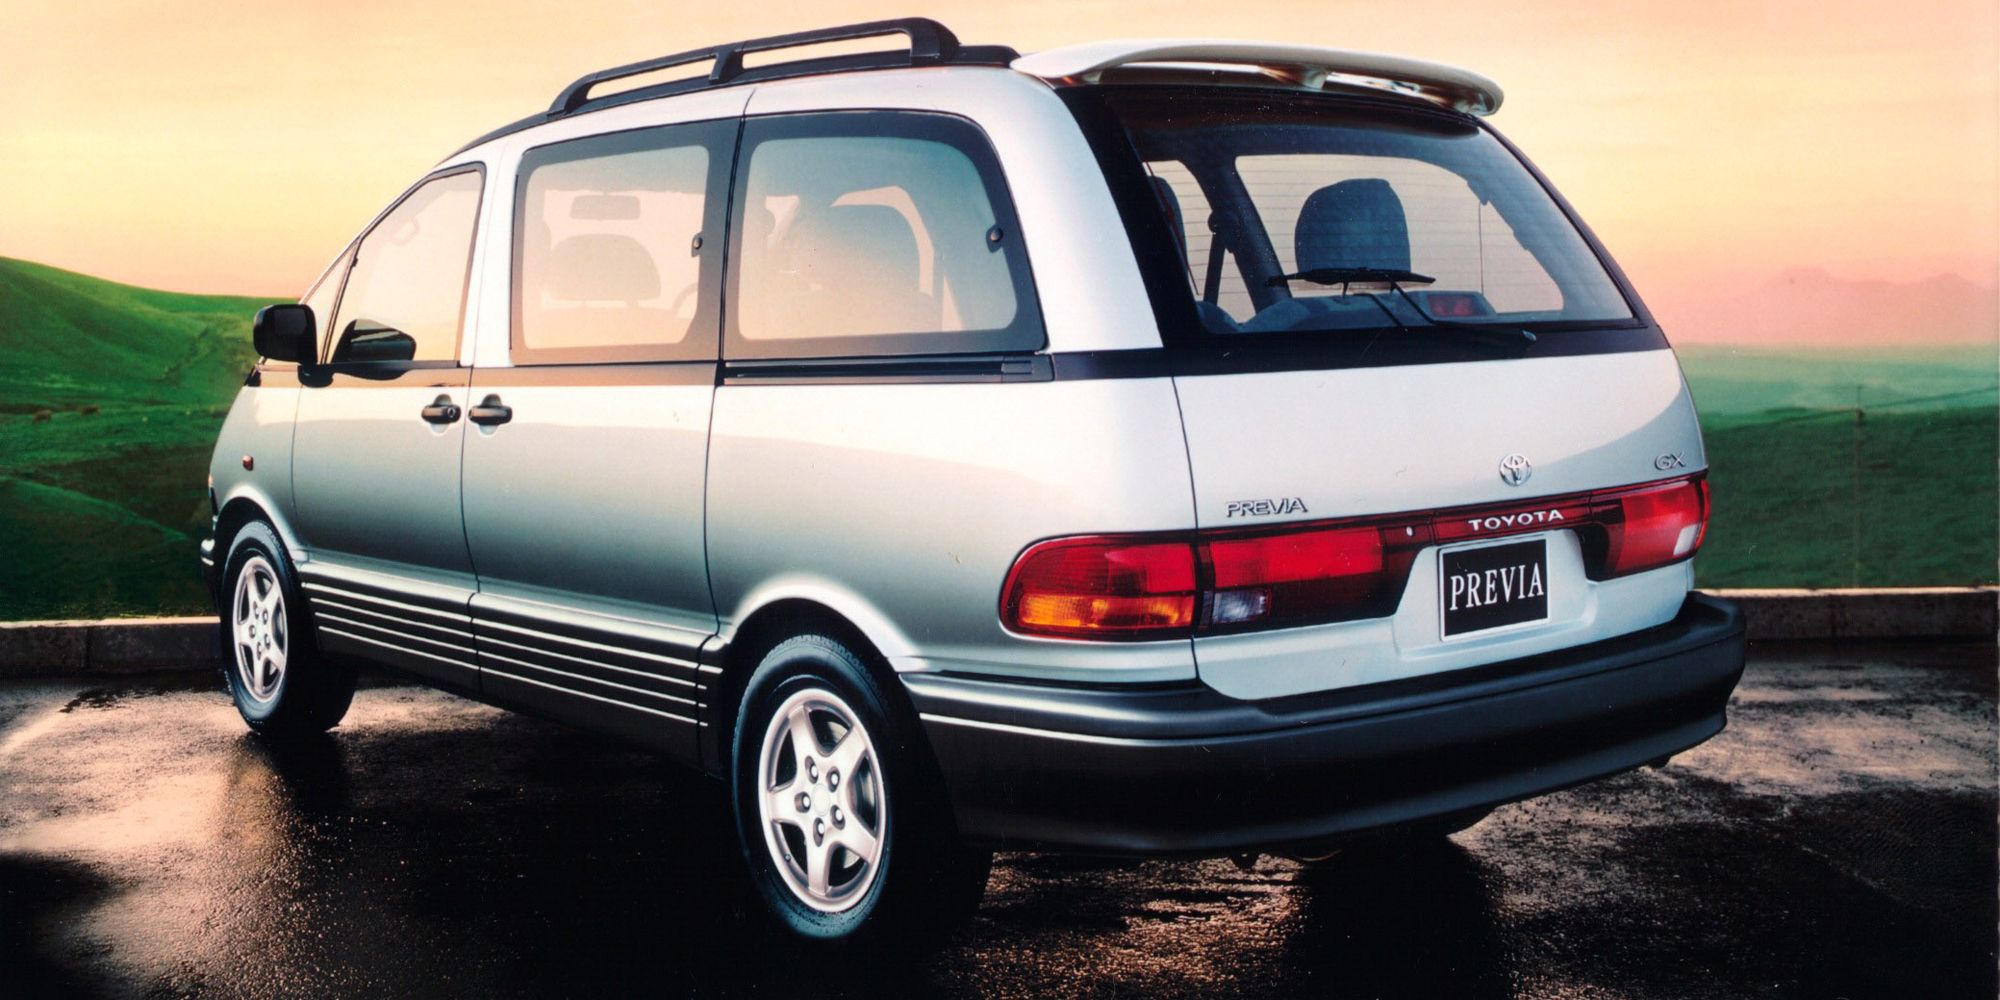 Rear 3/4 view of the Toyota Previa